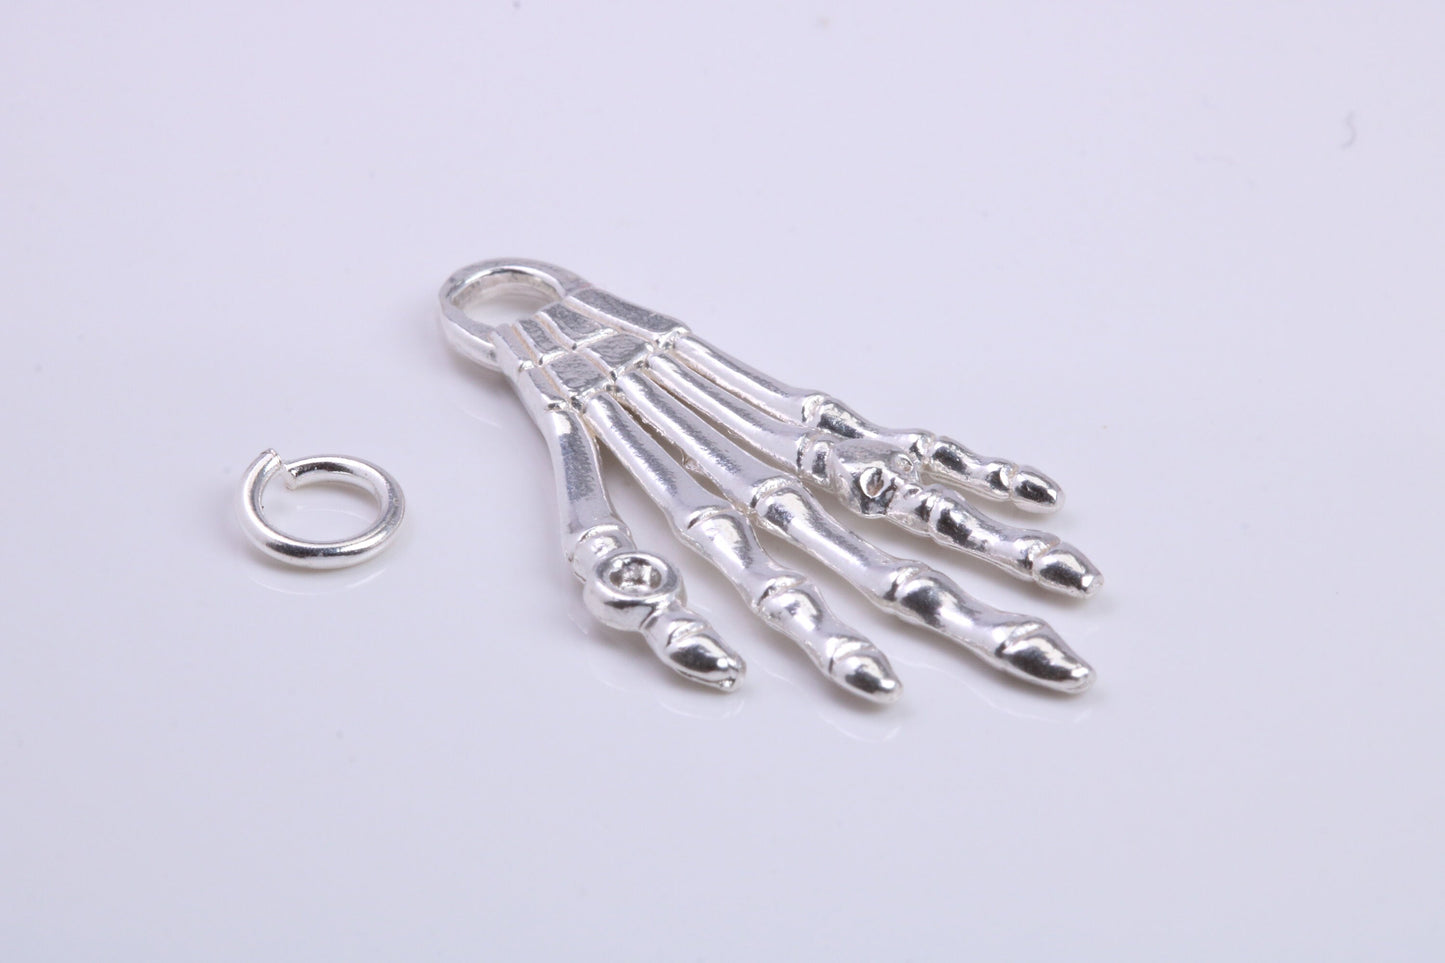 Skeleton Hand Charm, Traditional Charm, Made from Solid 925 Grade Sterling Silver, Complete with Attachment Link